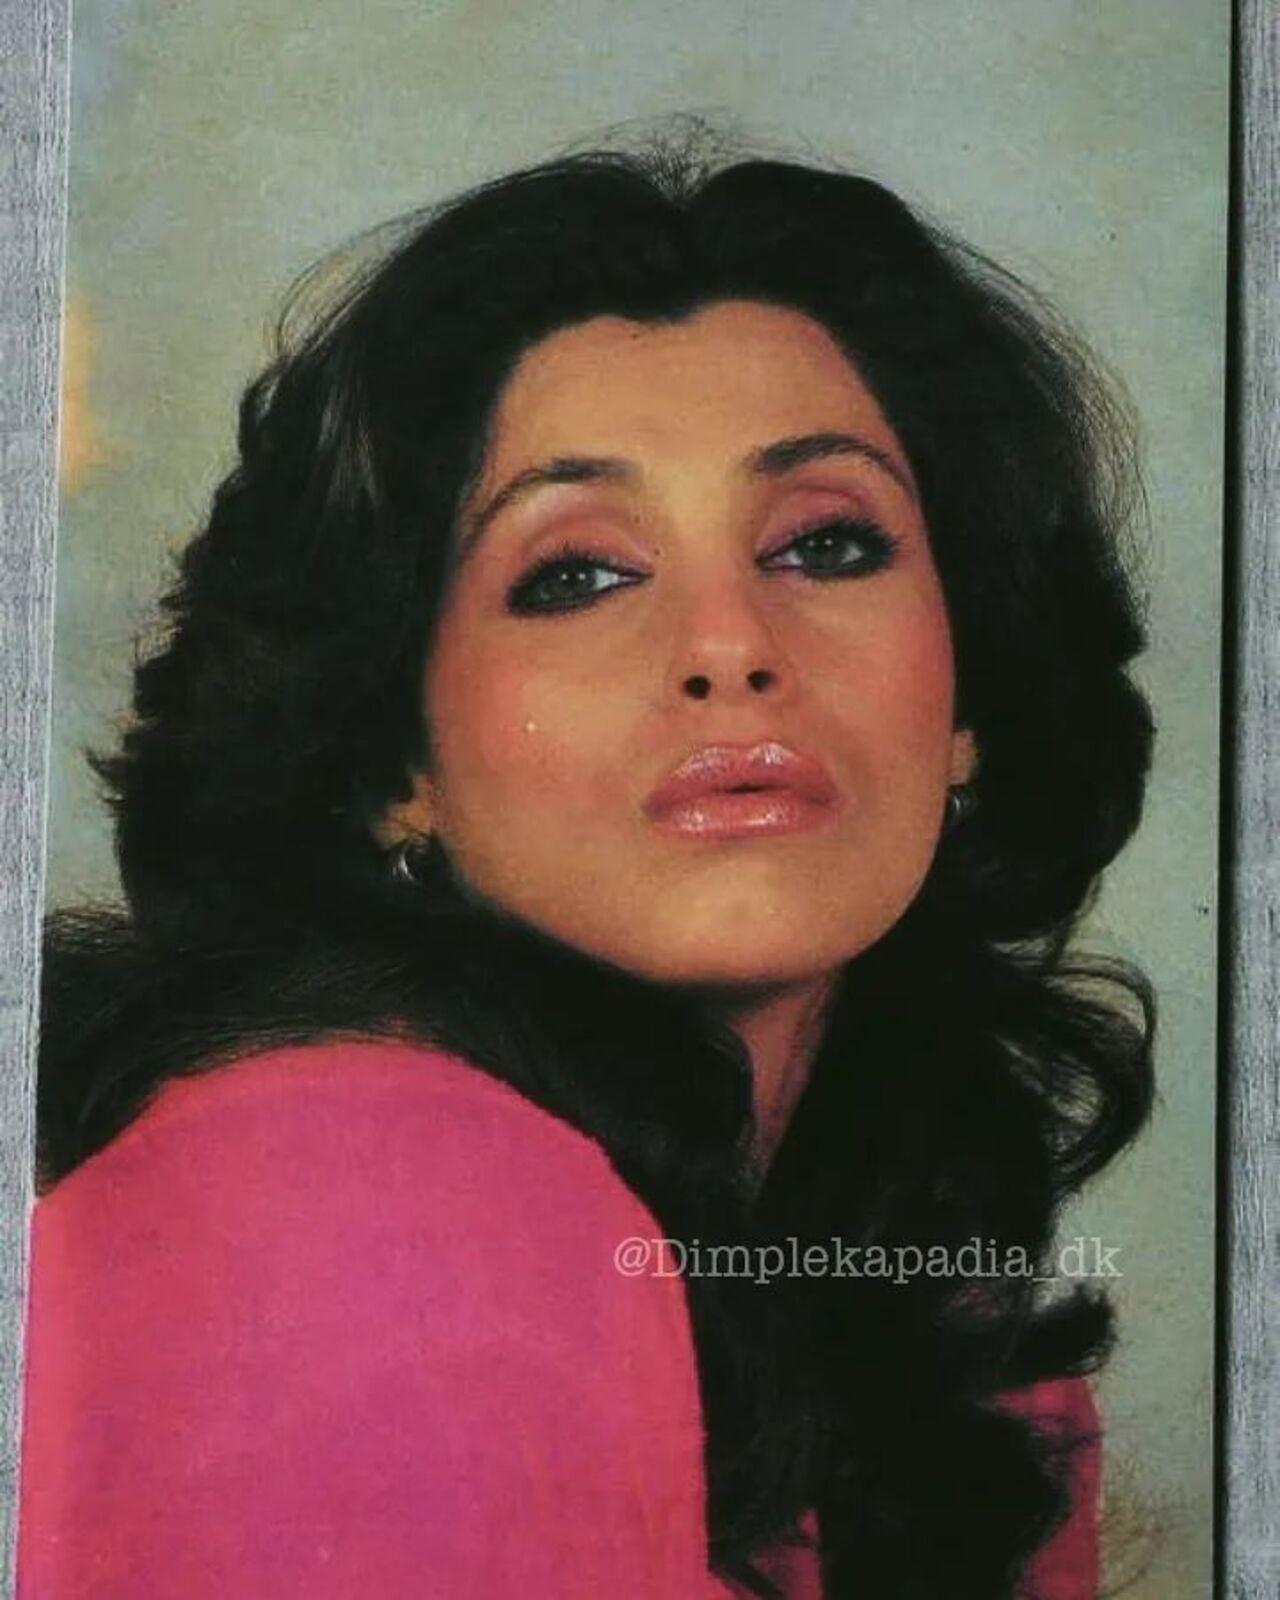 Dimple Kapadia’s layered blowout
In the '90s, Dimple Kapadia's voluminous layered blowout in the film 'Ram Lakhan' became an instant sensation. The hairstyle, with its captivating flow around the shoulders, inspired countless fans to mimic the look. Alongside this hair trend, glossy lips and rosy shades were all the rage